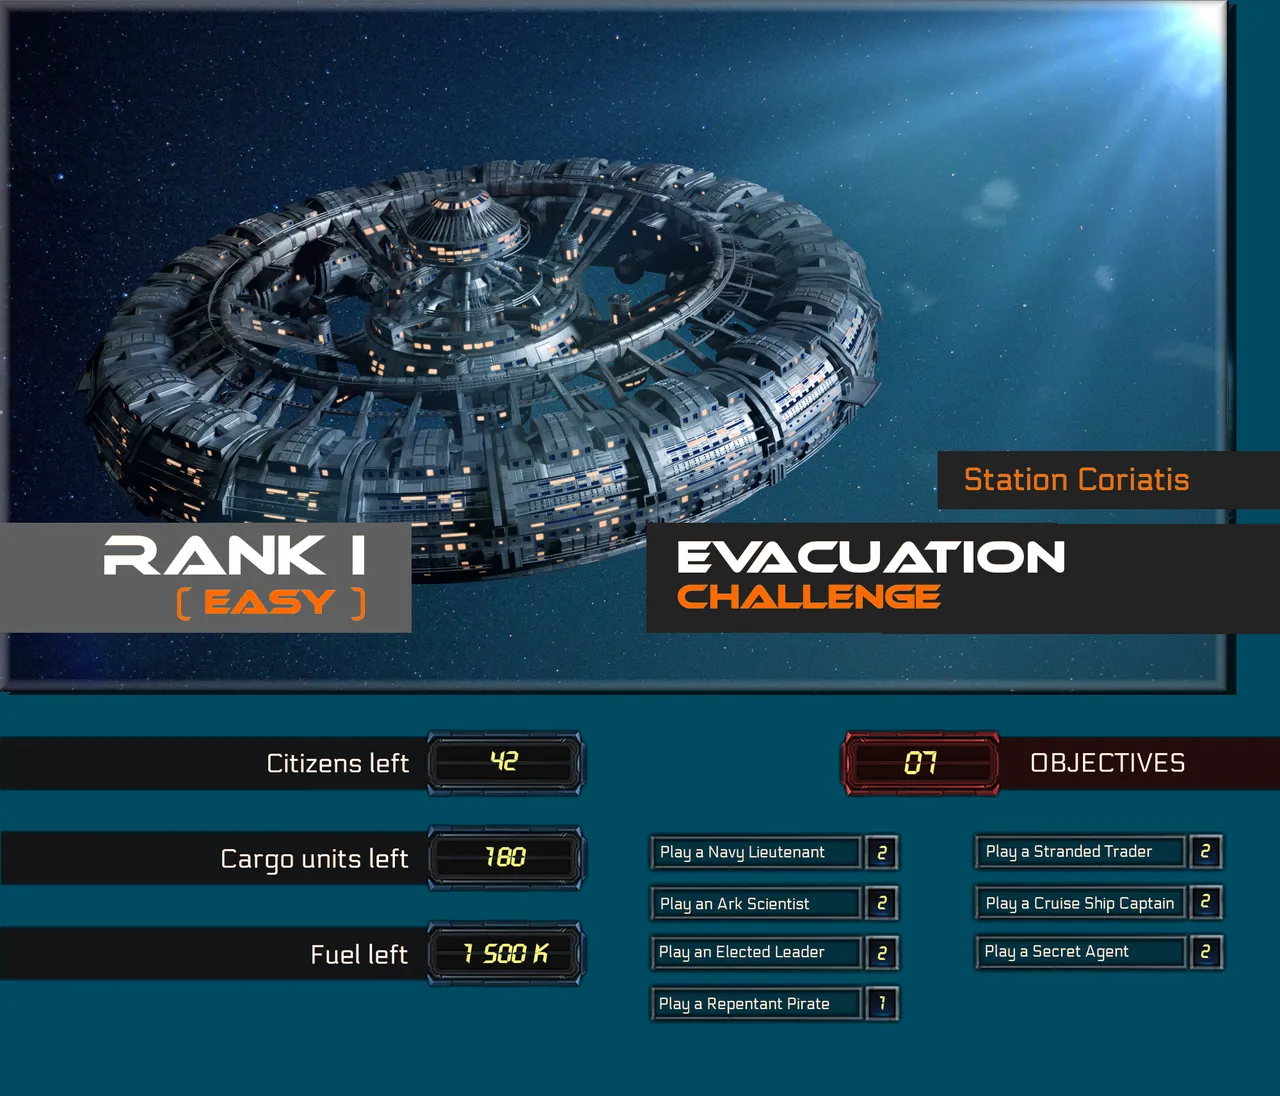 Example of our contest - Station Rank I